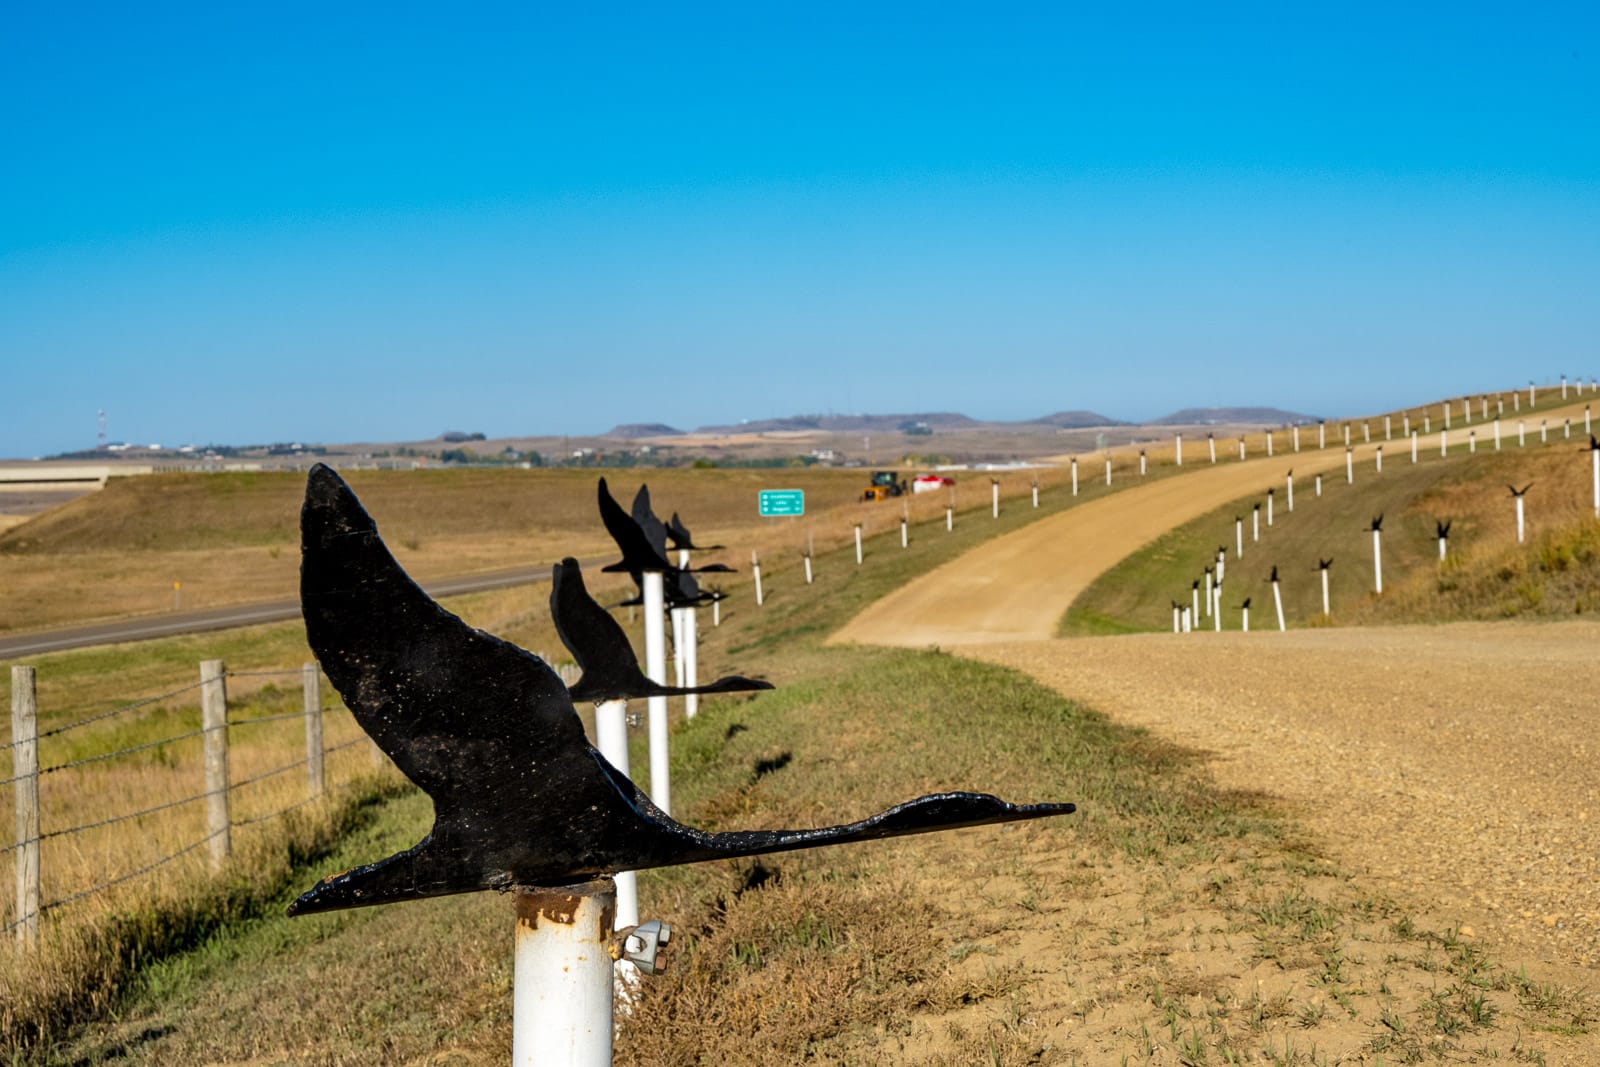 Flying geese line the road leading to the sculpture by Gary Greff called Geese in Flight. It is located at the Gladstone exit of I-94 and the Regent Road in North Dakota.